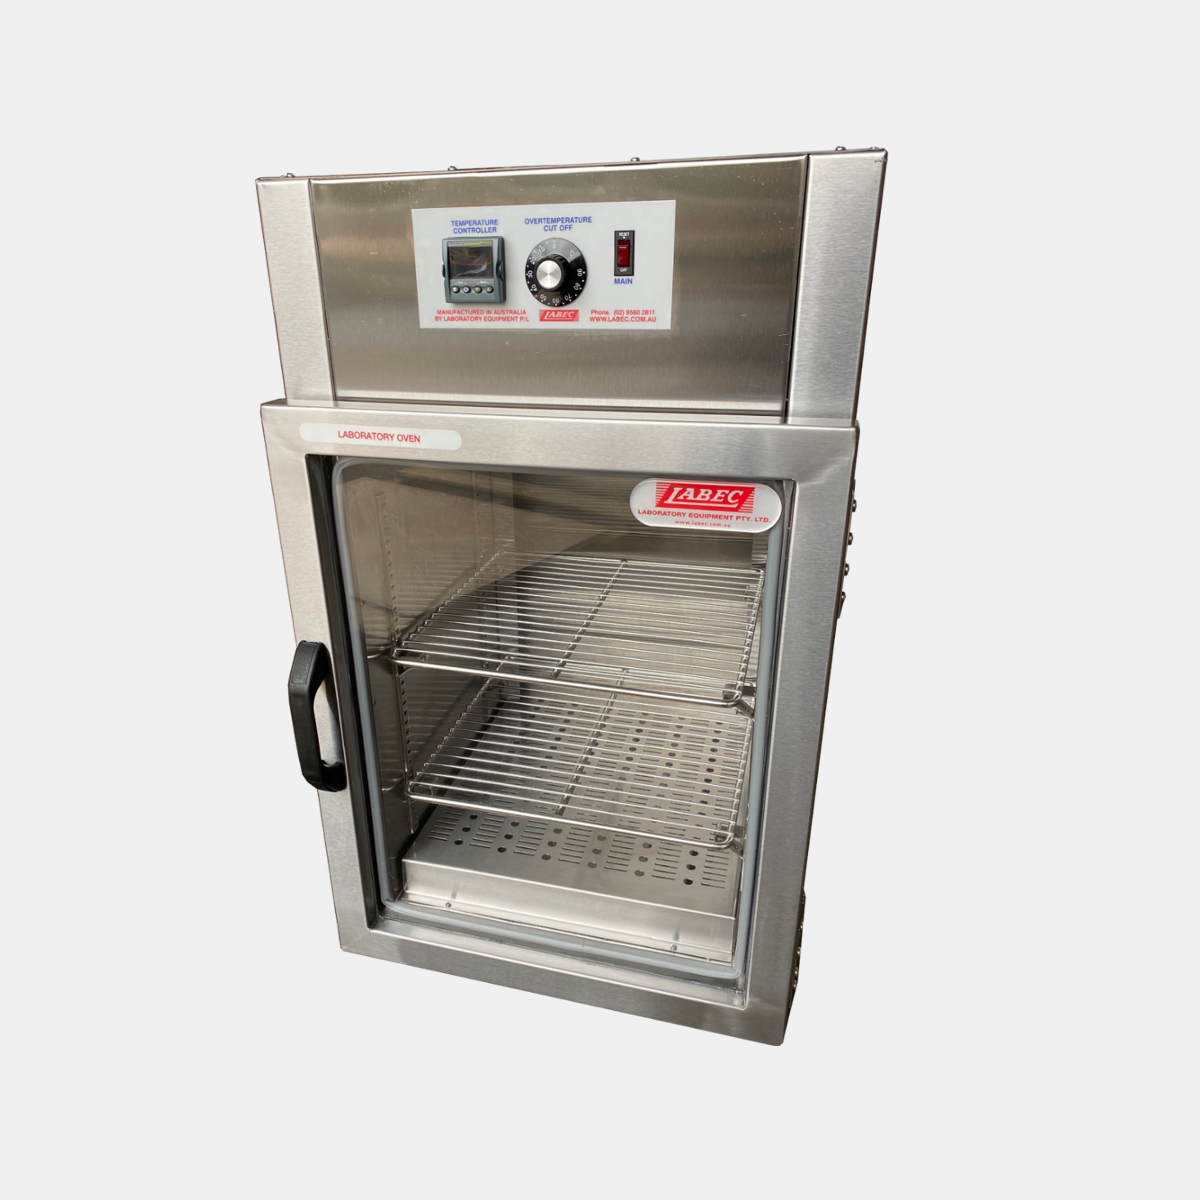 Glassware Drying Ovens – Upright Style (up to +80ºC)